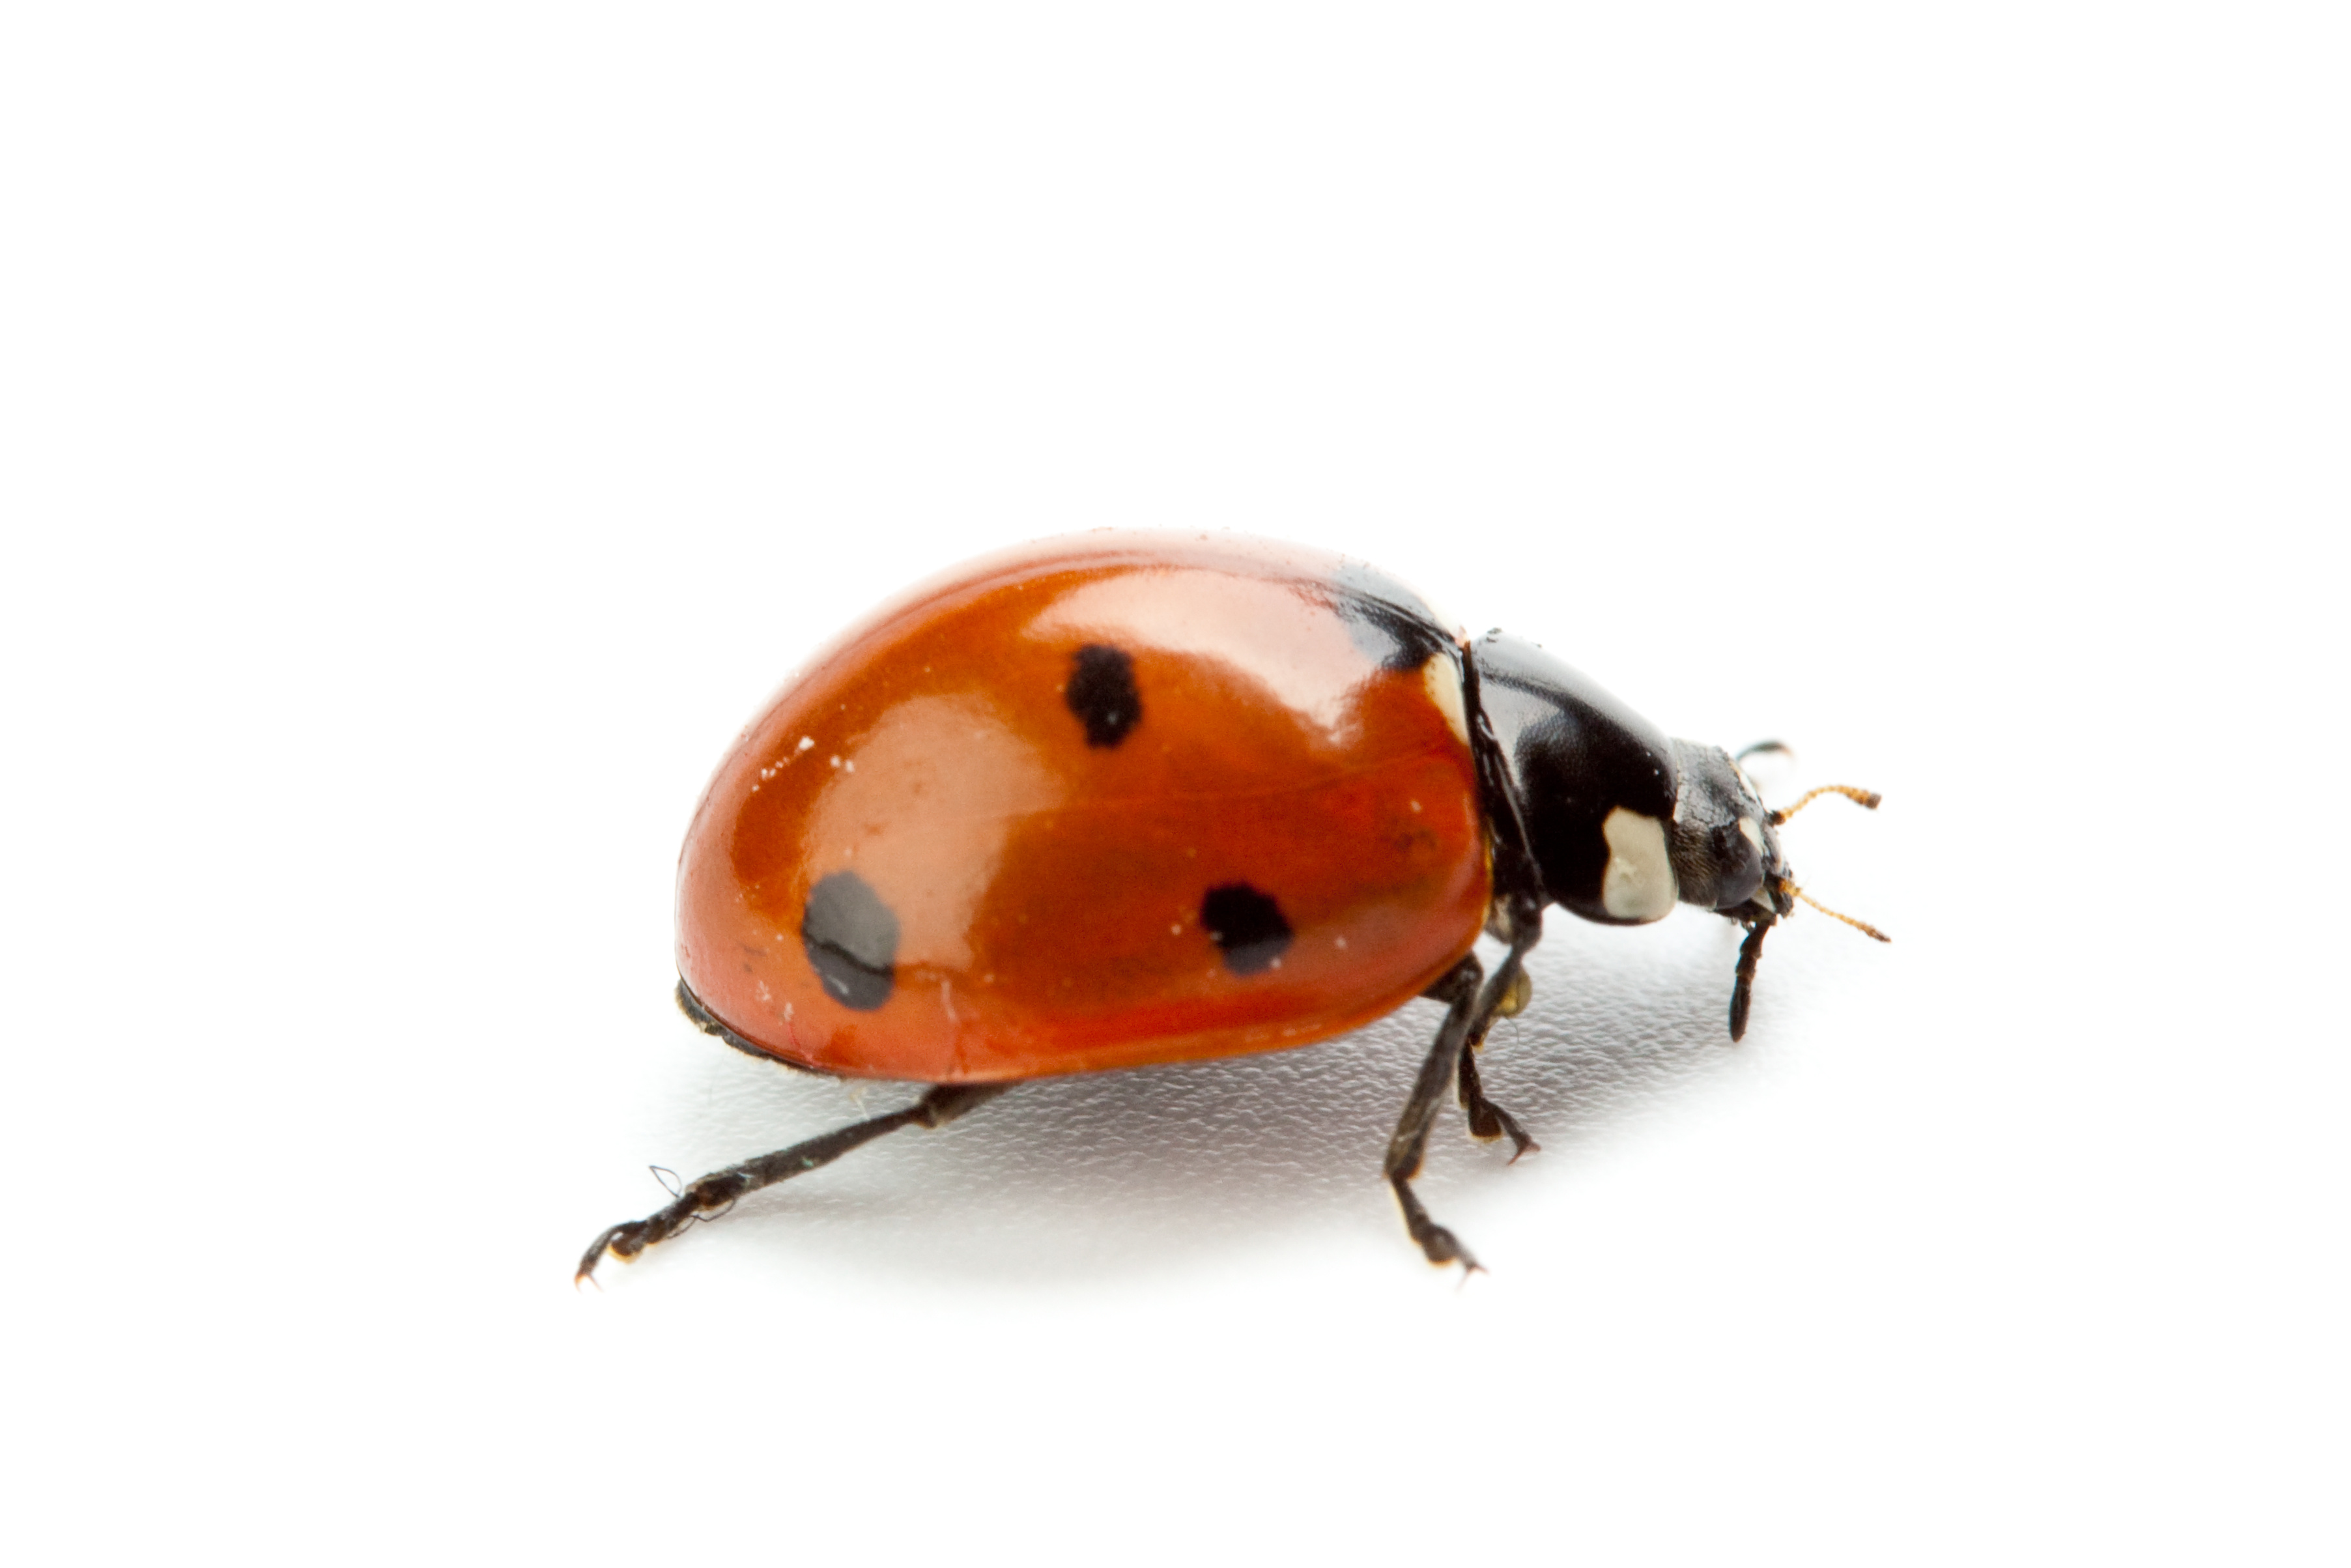 Are any ladybugs poisonous?